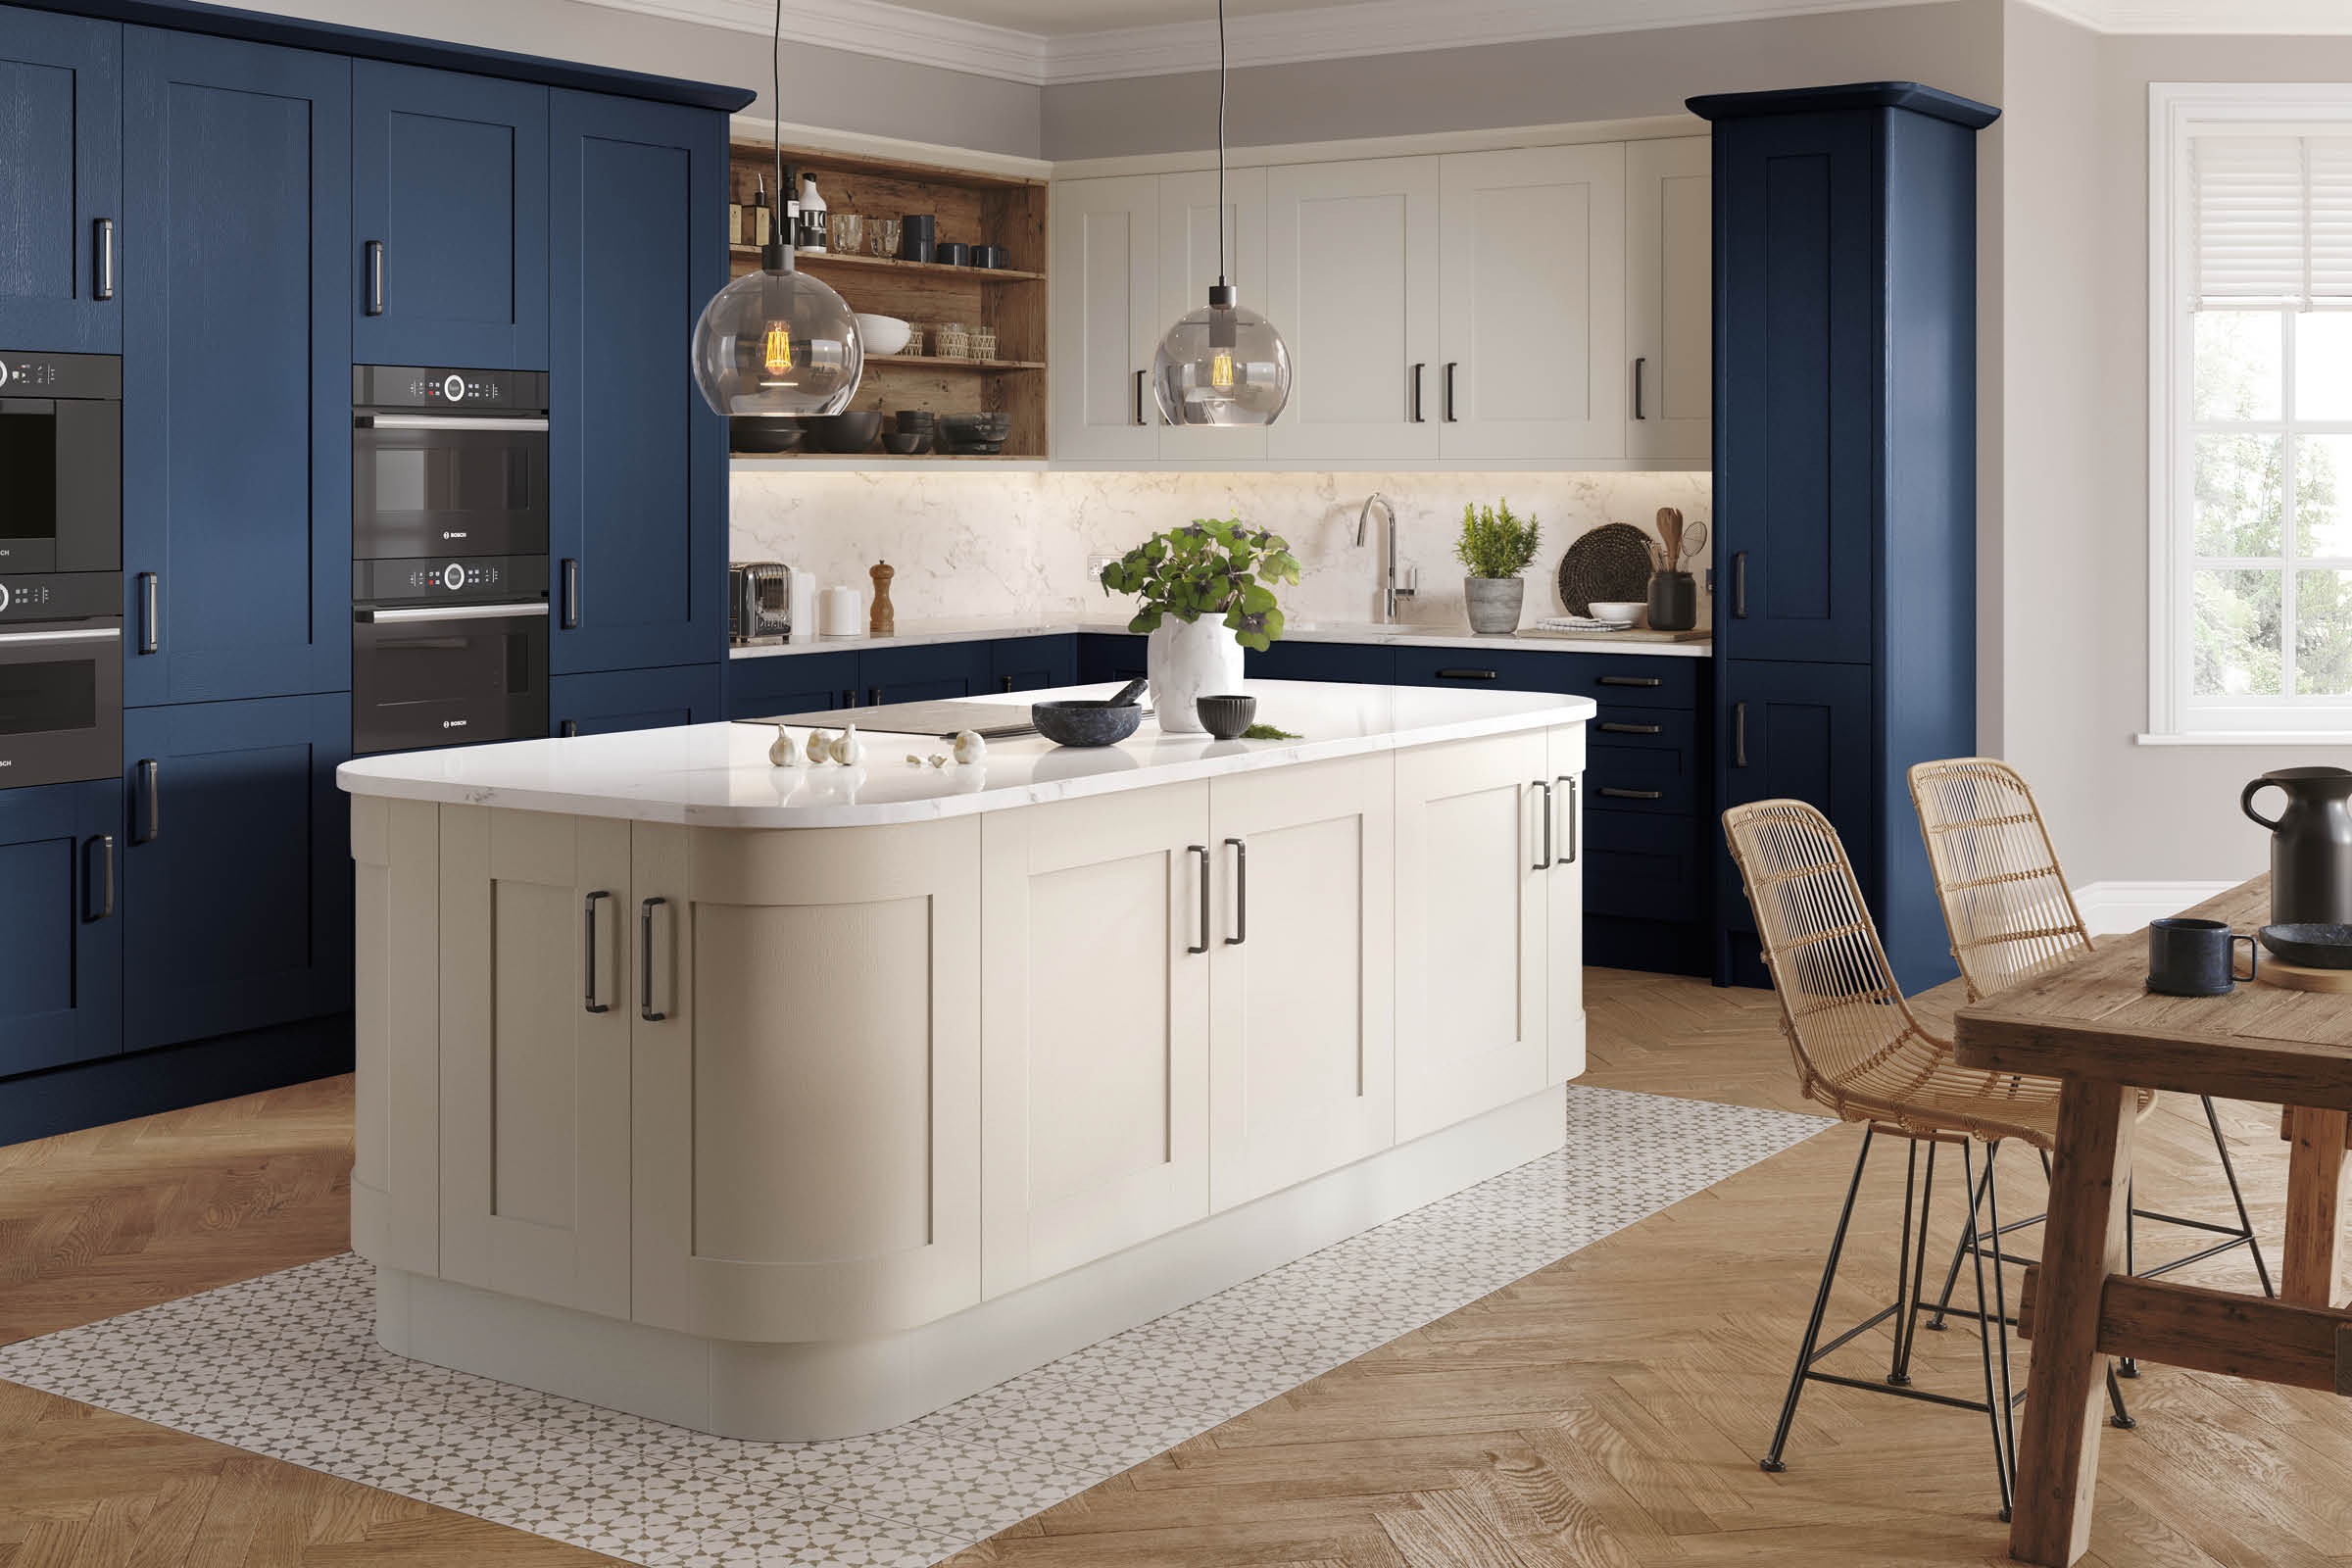 9. Blue Christmas? Choose the Wilton Oakgrain Azure Blue & Wilton Oakgrain Grey kitchen to add a blue that you will love in your home